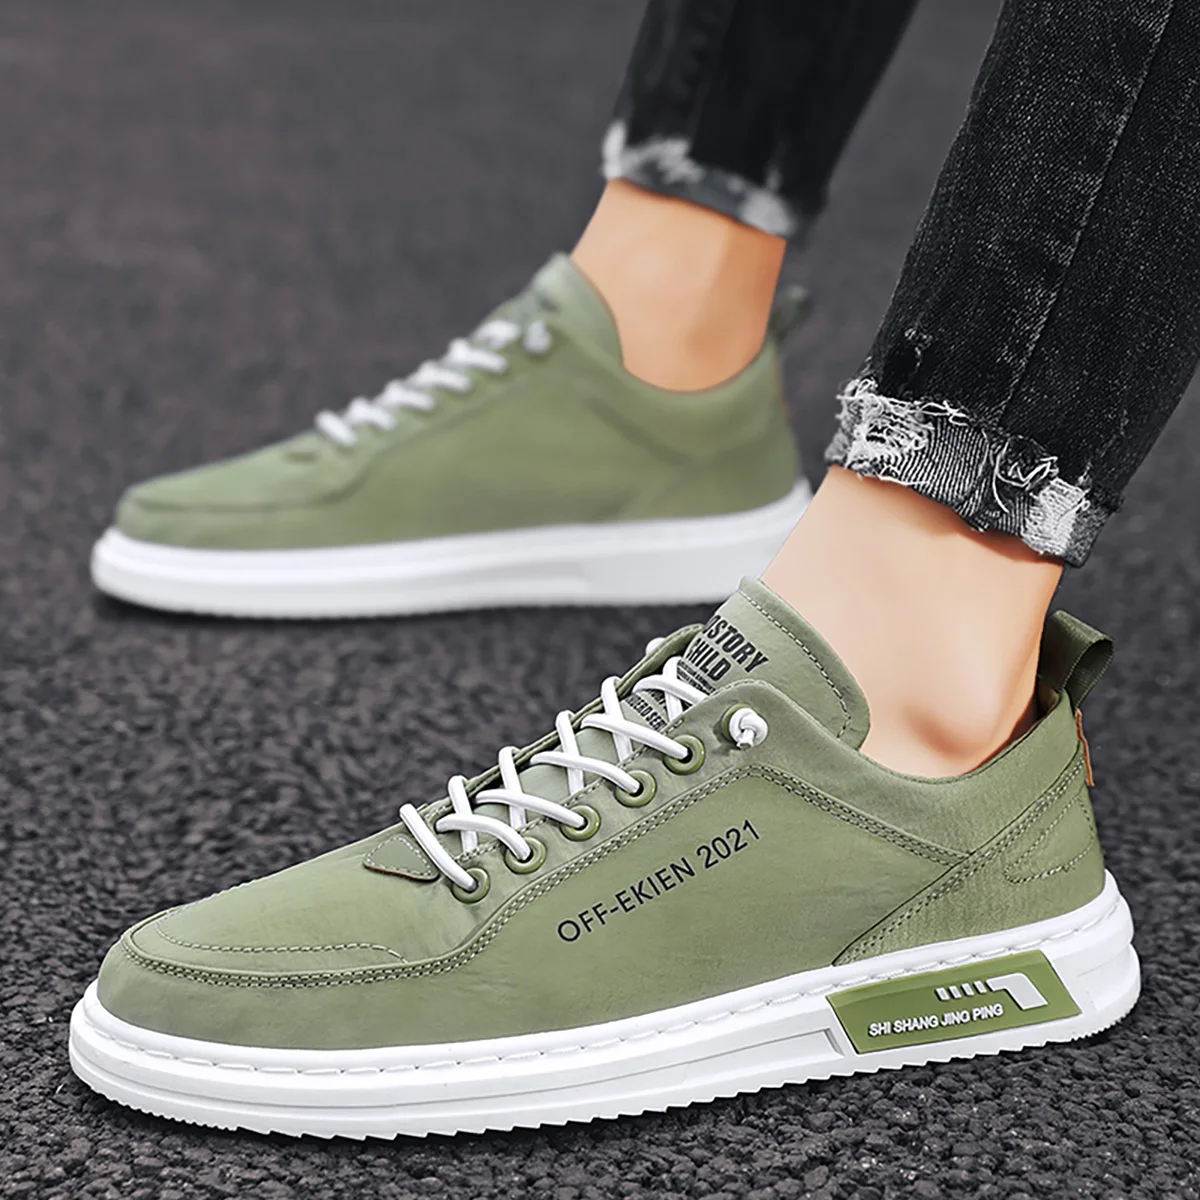 

Casual Men Skateboarding Shoes School Boys Skate Shoes Outdoor Fitness Summer Green Lace-Up Shoes Man Sneakers Durable Shoes F79